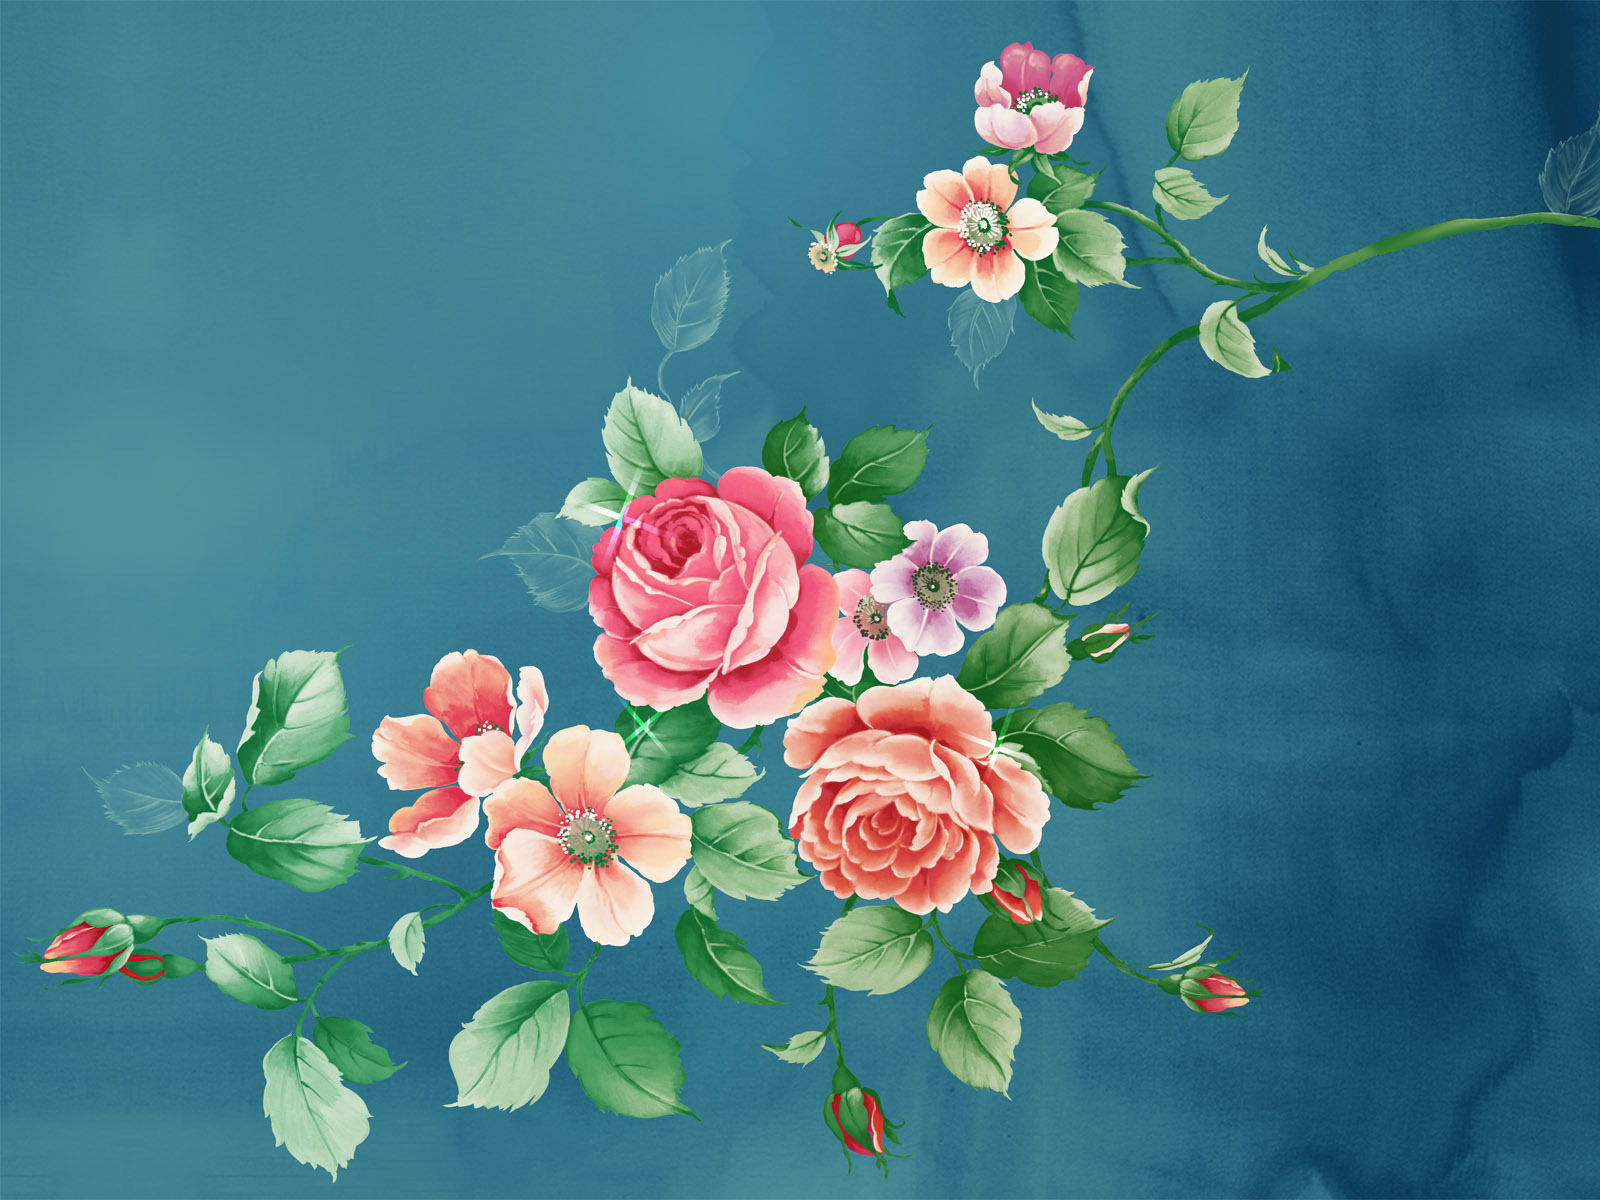 plants, pictures, roses, flowers, turquoise Full HD